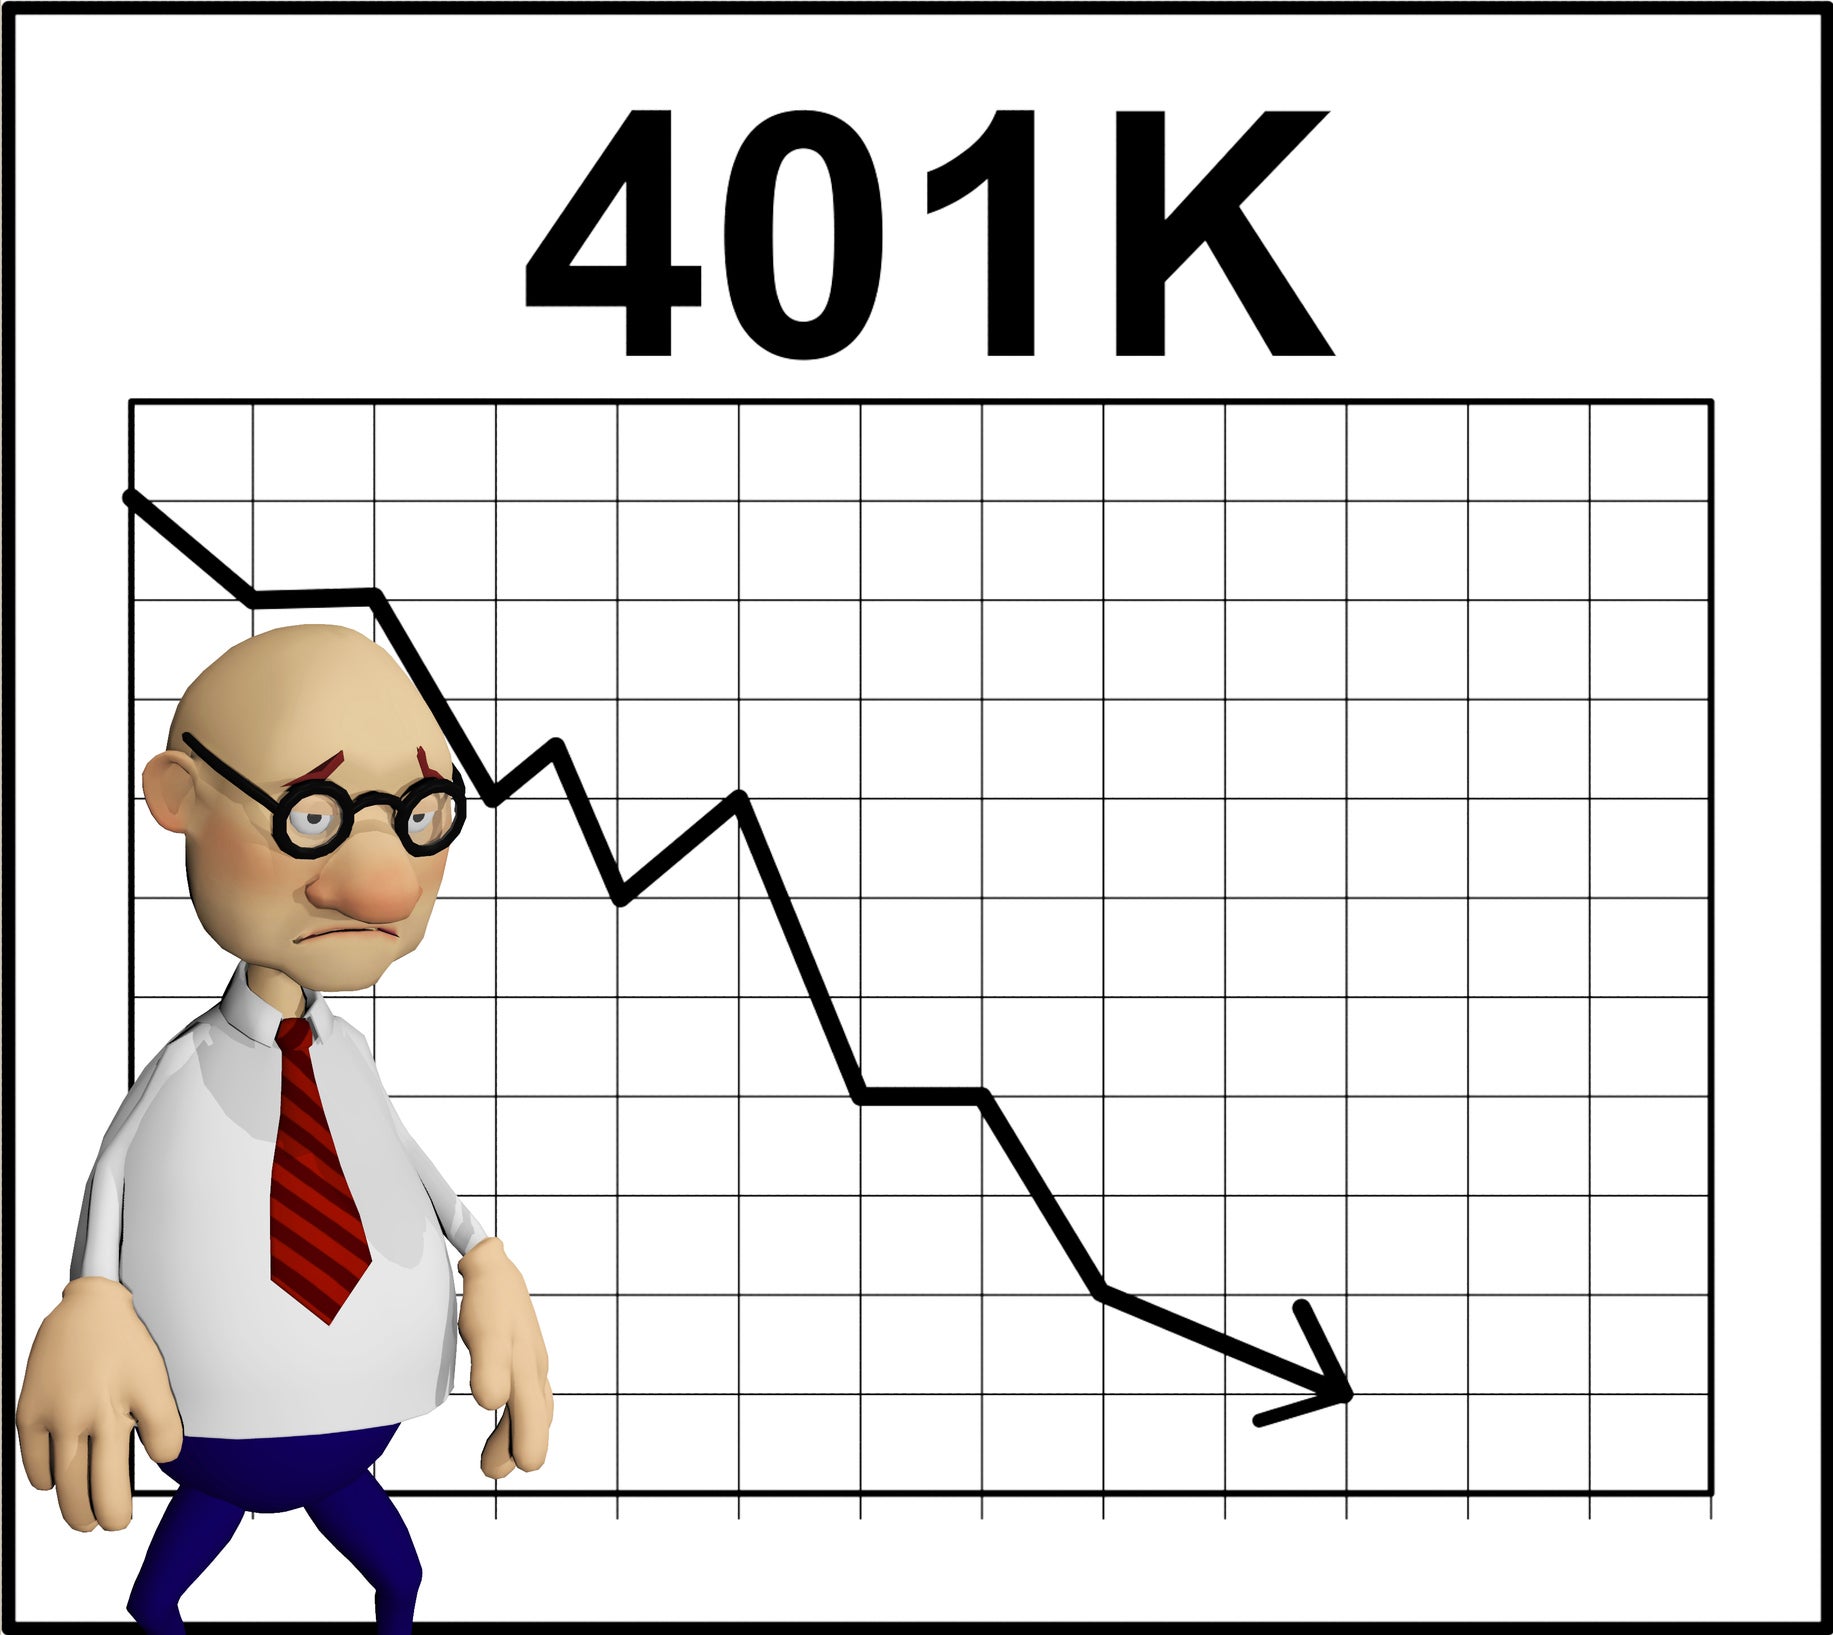 Cashing Out a 401(k)? Stop Now and Read This First!